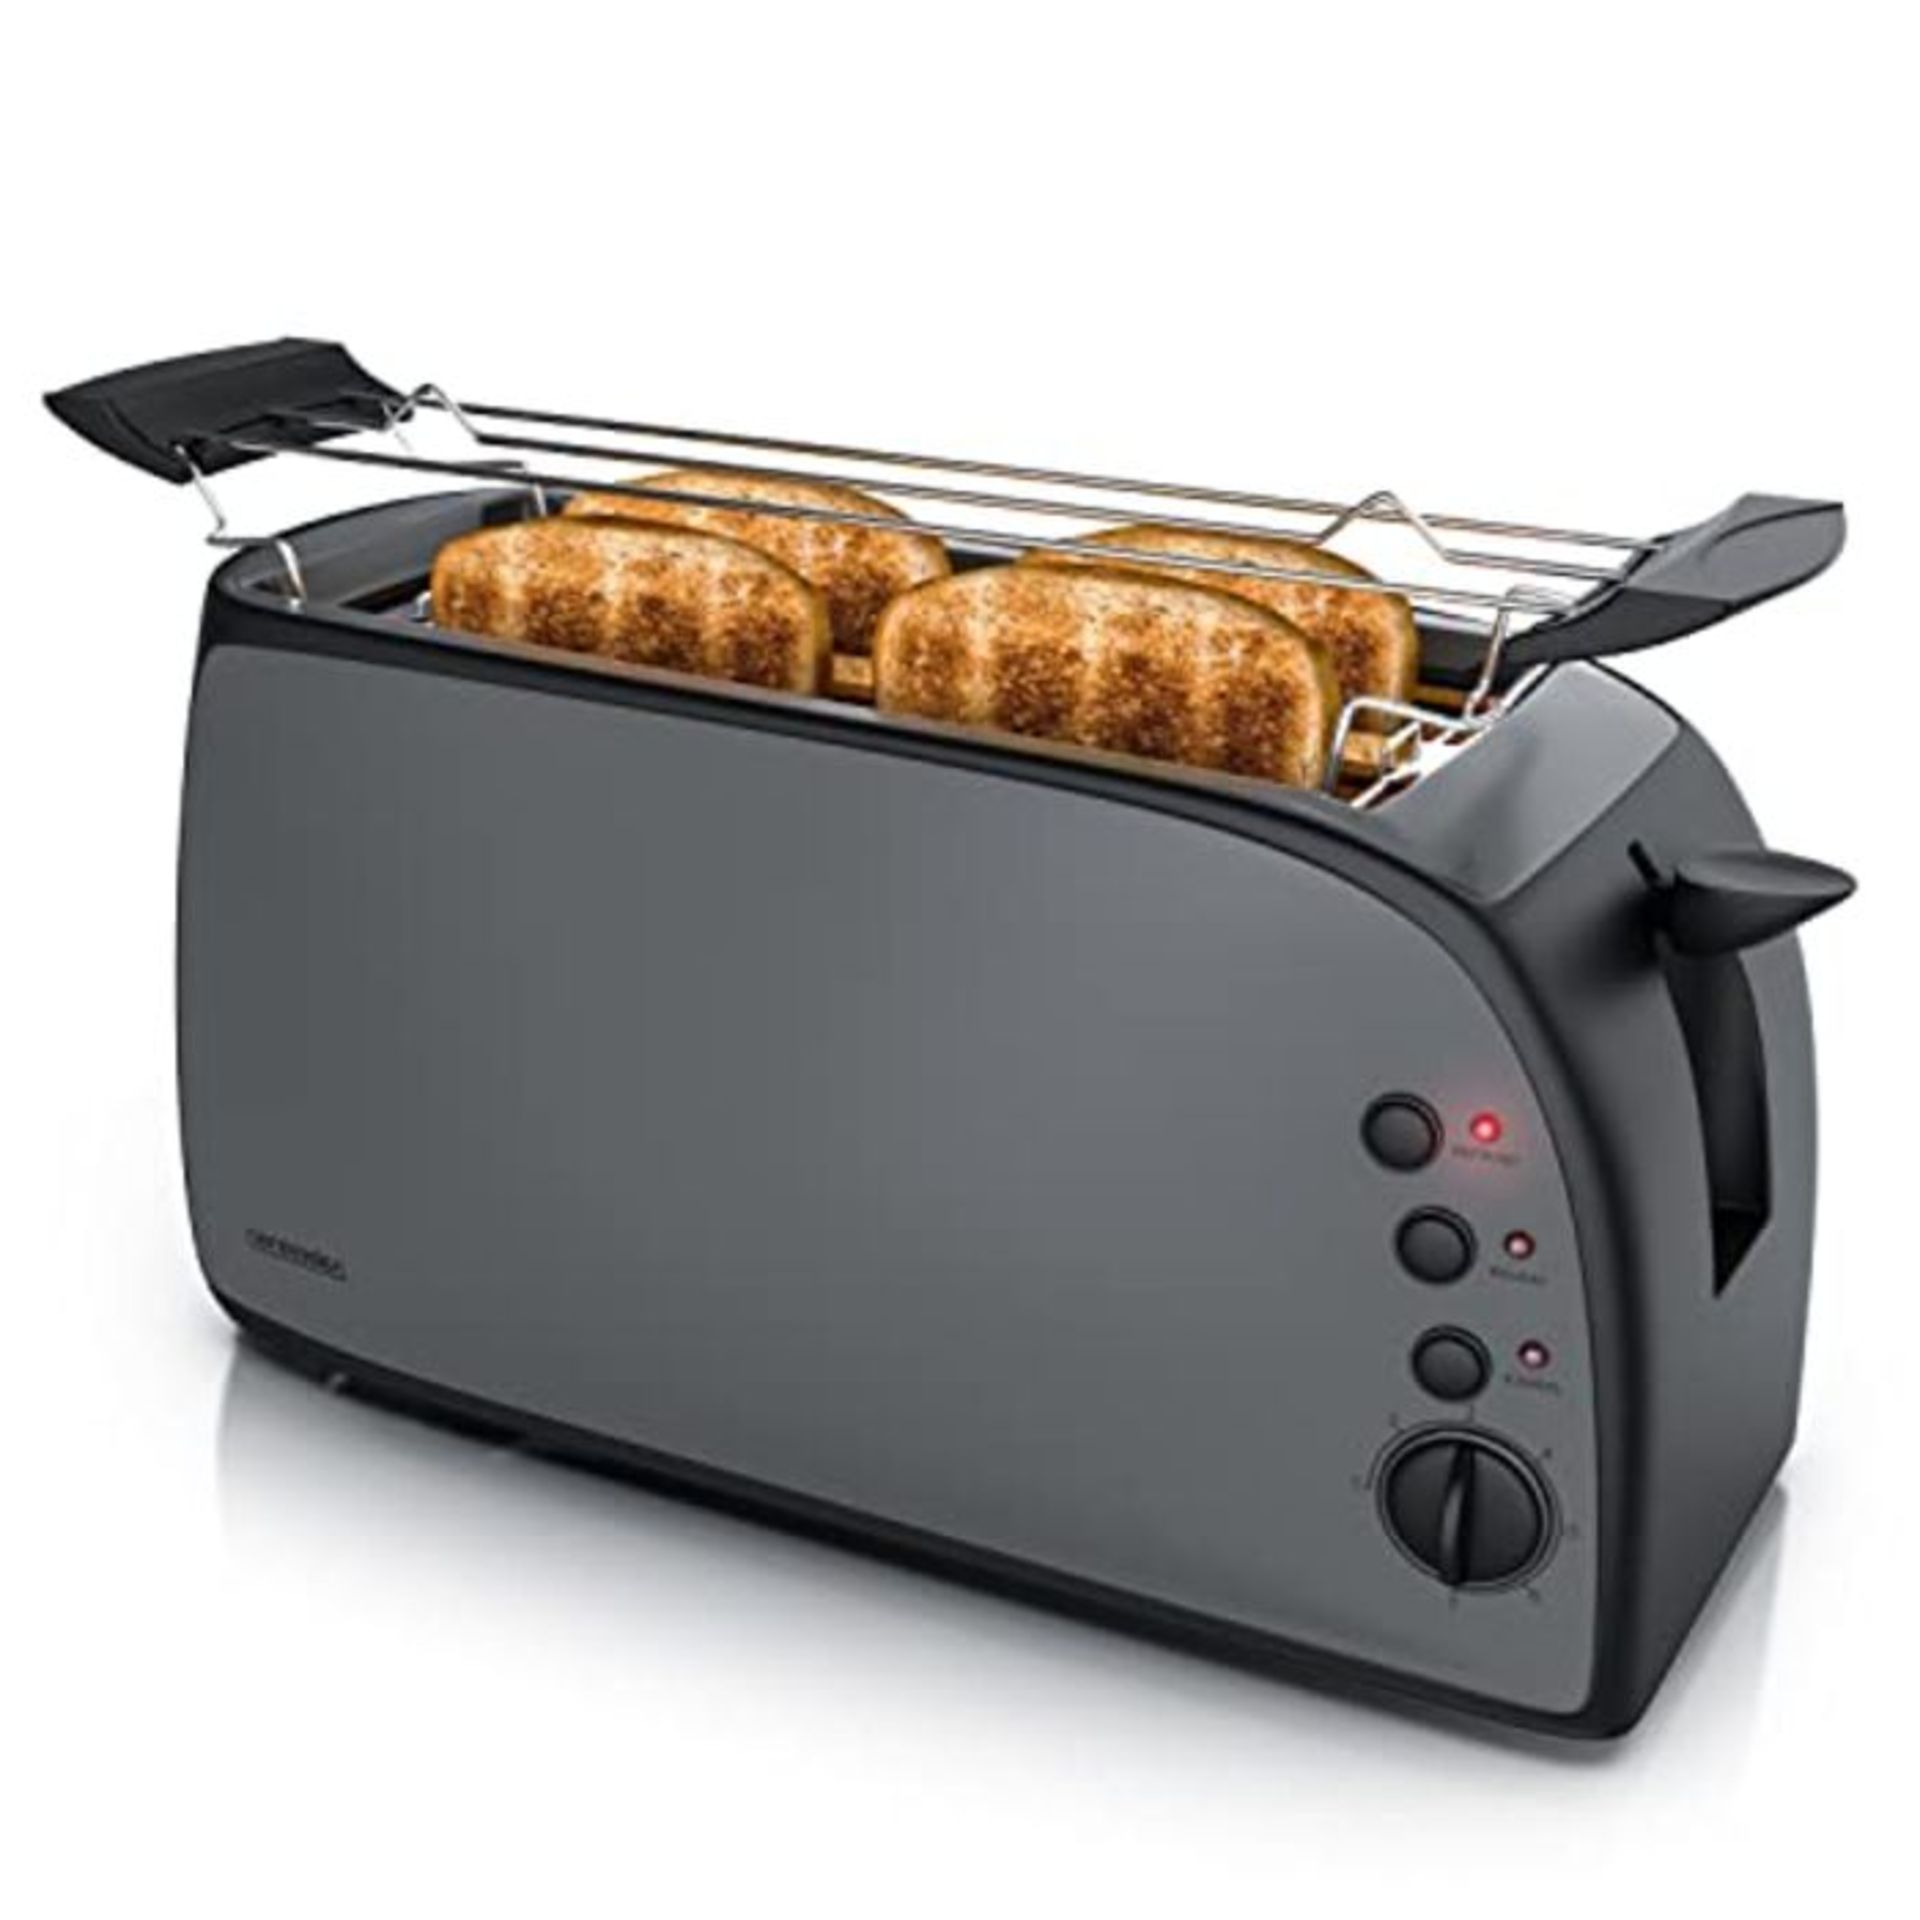 Arendo - Automatic toaster long slot - defrost function - heat-insulating housing - re